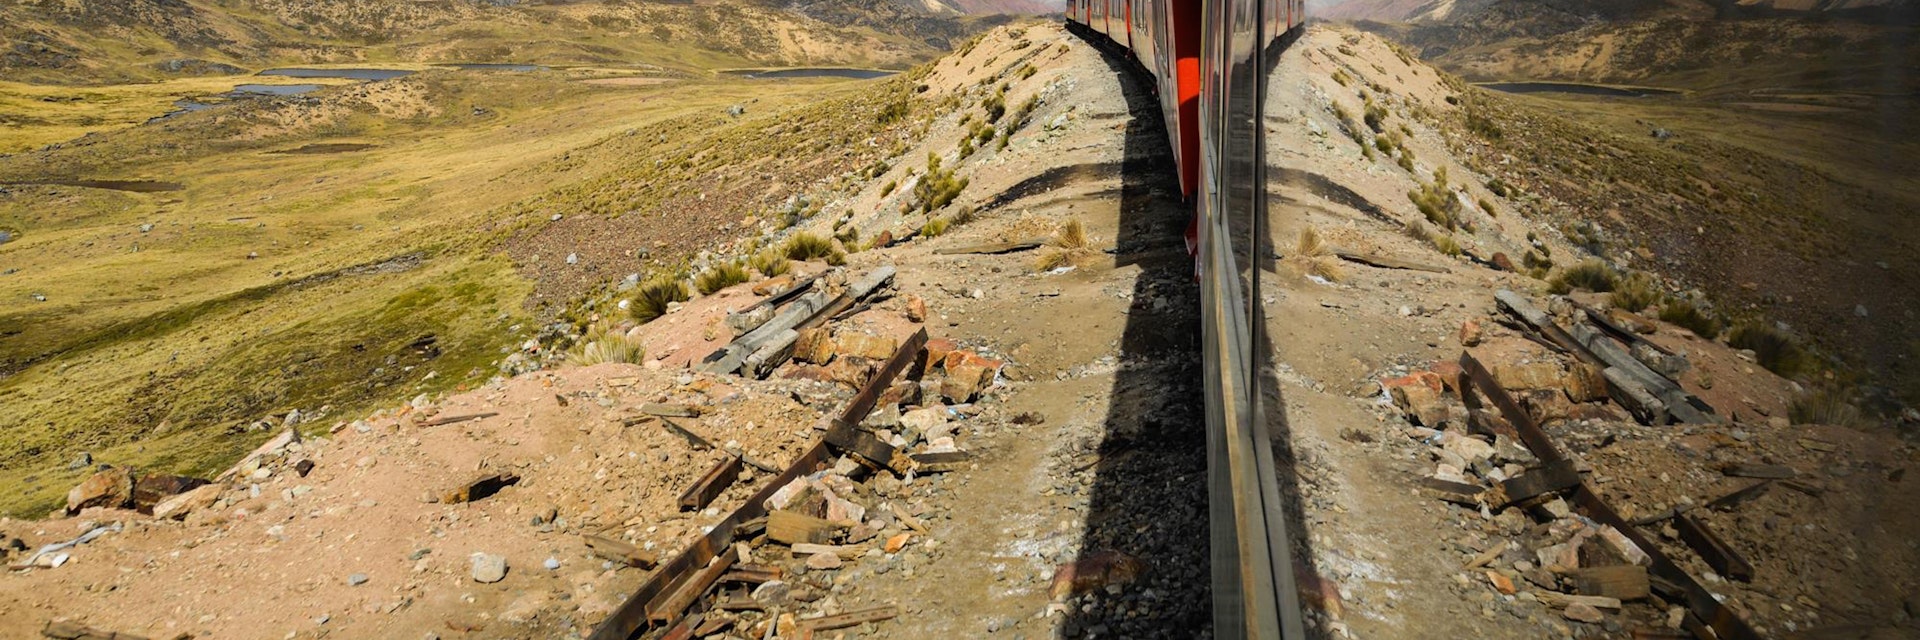 The Ferrocaril Central Andino train, the worlds second highest railroad, crosses the Andes en route from Lima to Huancayo.